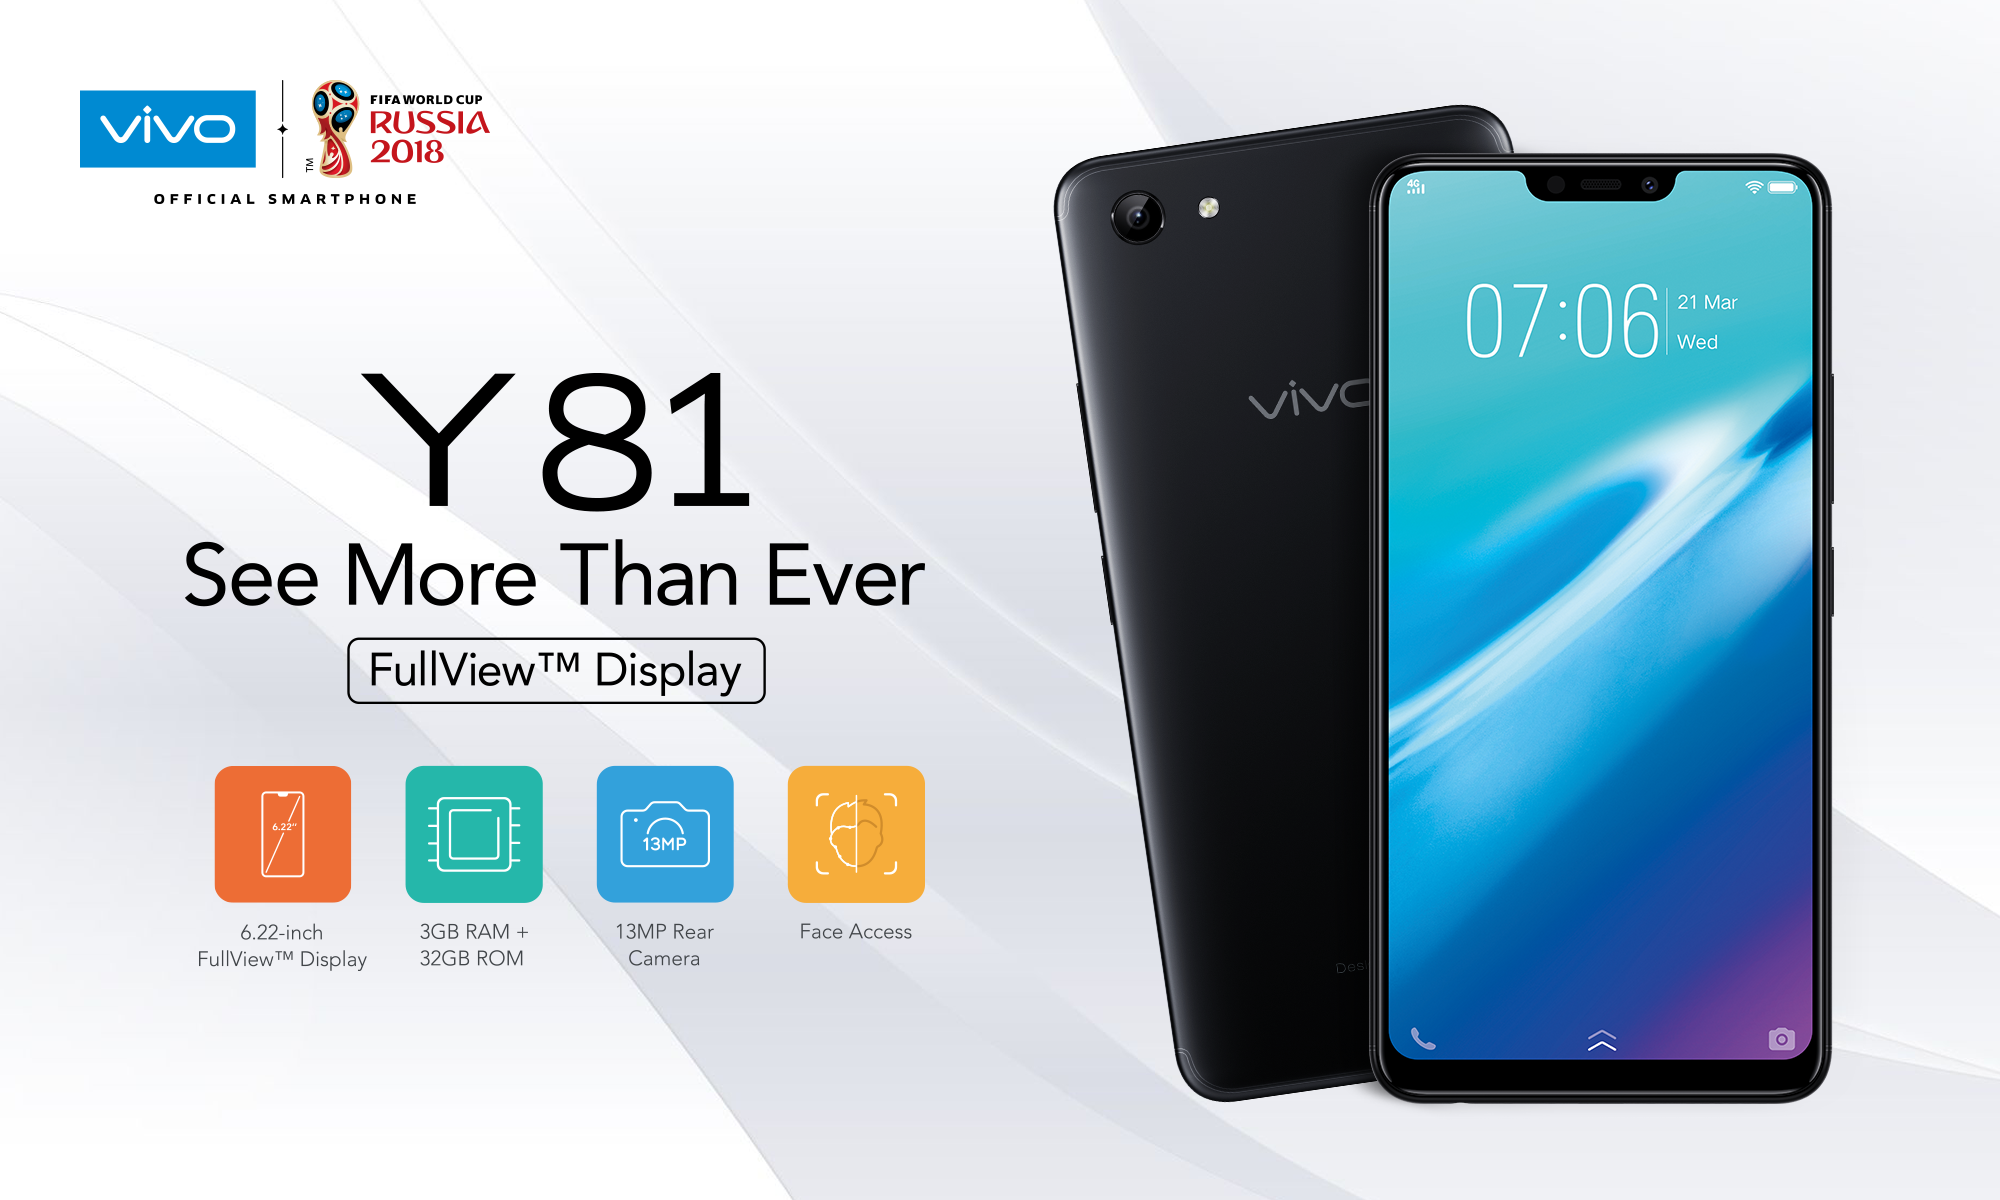 Entry-level vivo Y81 with 6.22-inch display, 3260mAh battery, Face Access and more is on sale for RM799